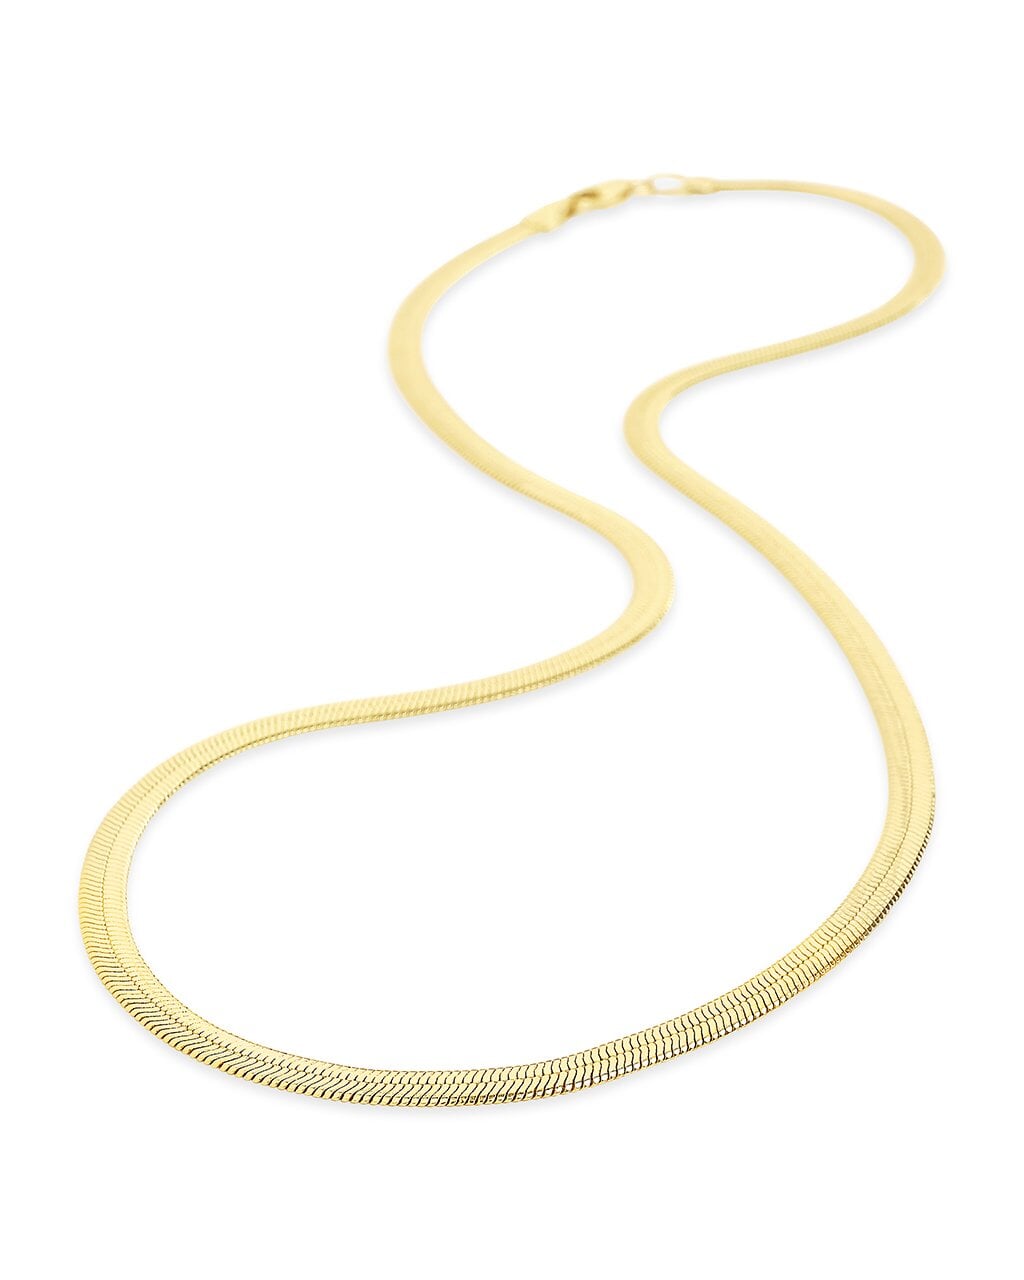 Men's Herringbone Chain Necklace Necklace Sterling Forever 